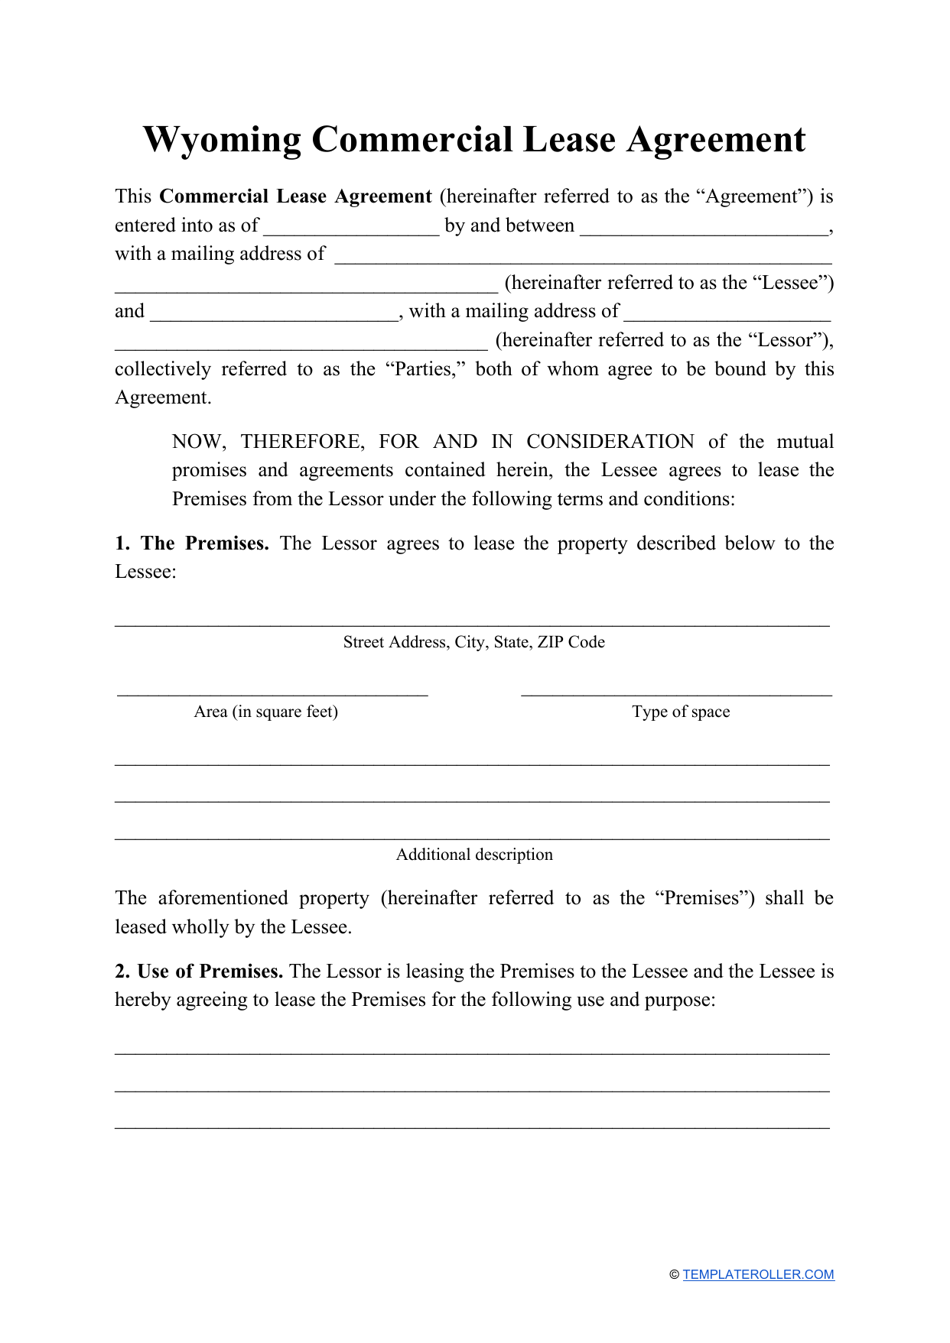 Commercial Lease Agreement Template - Wyoming, Page 1